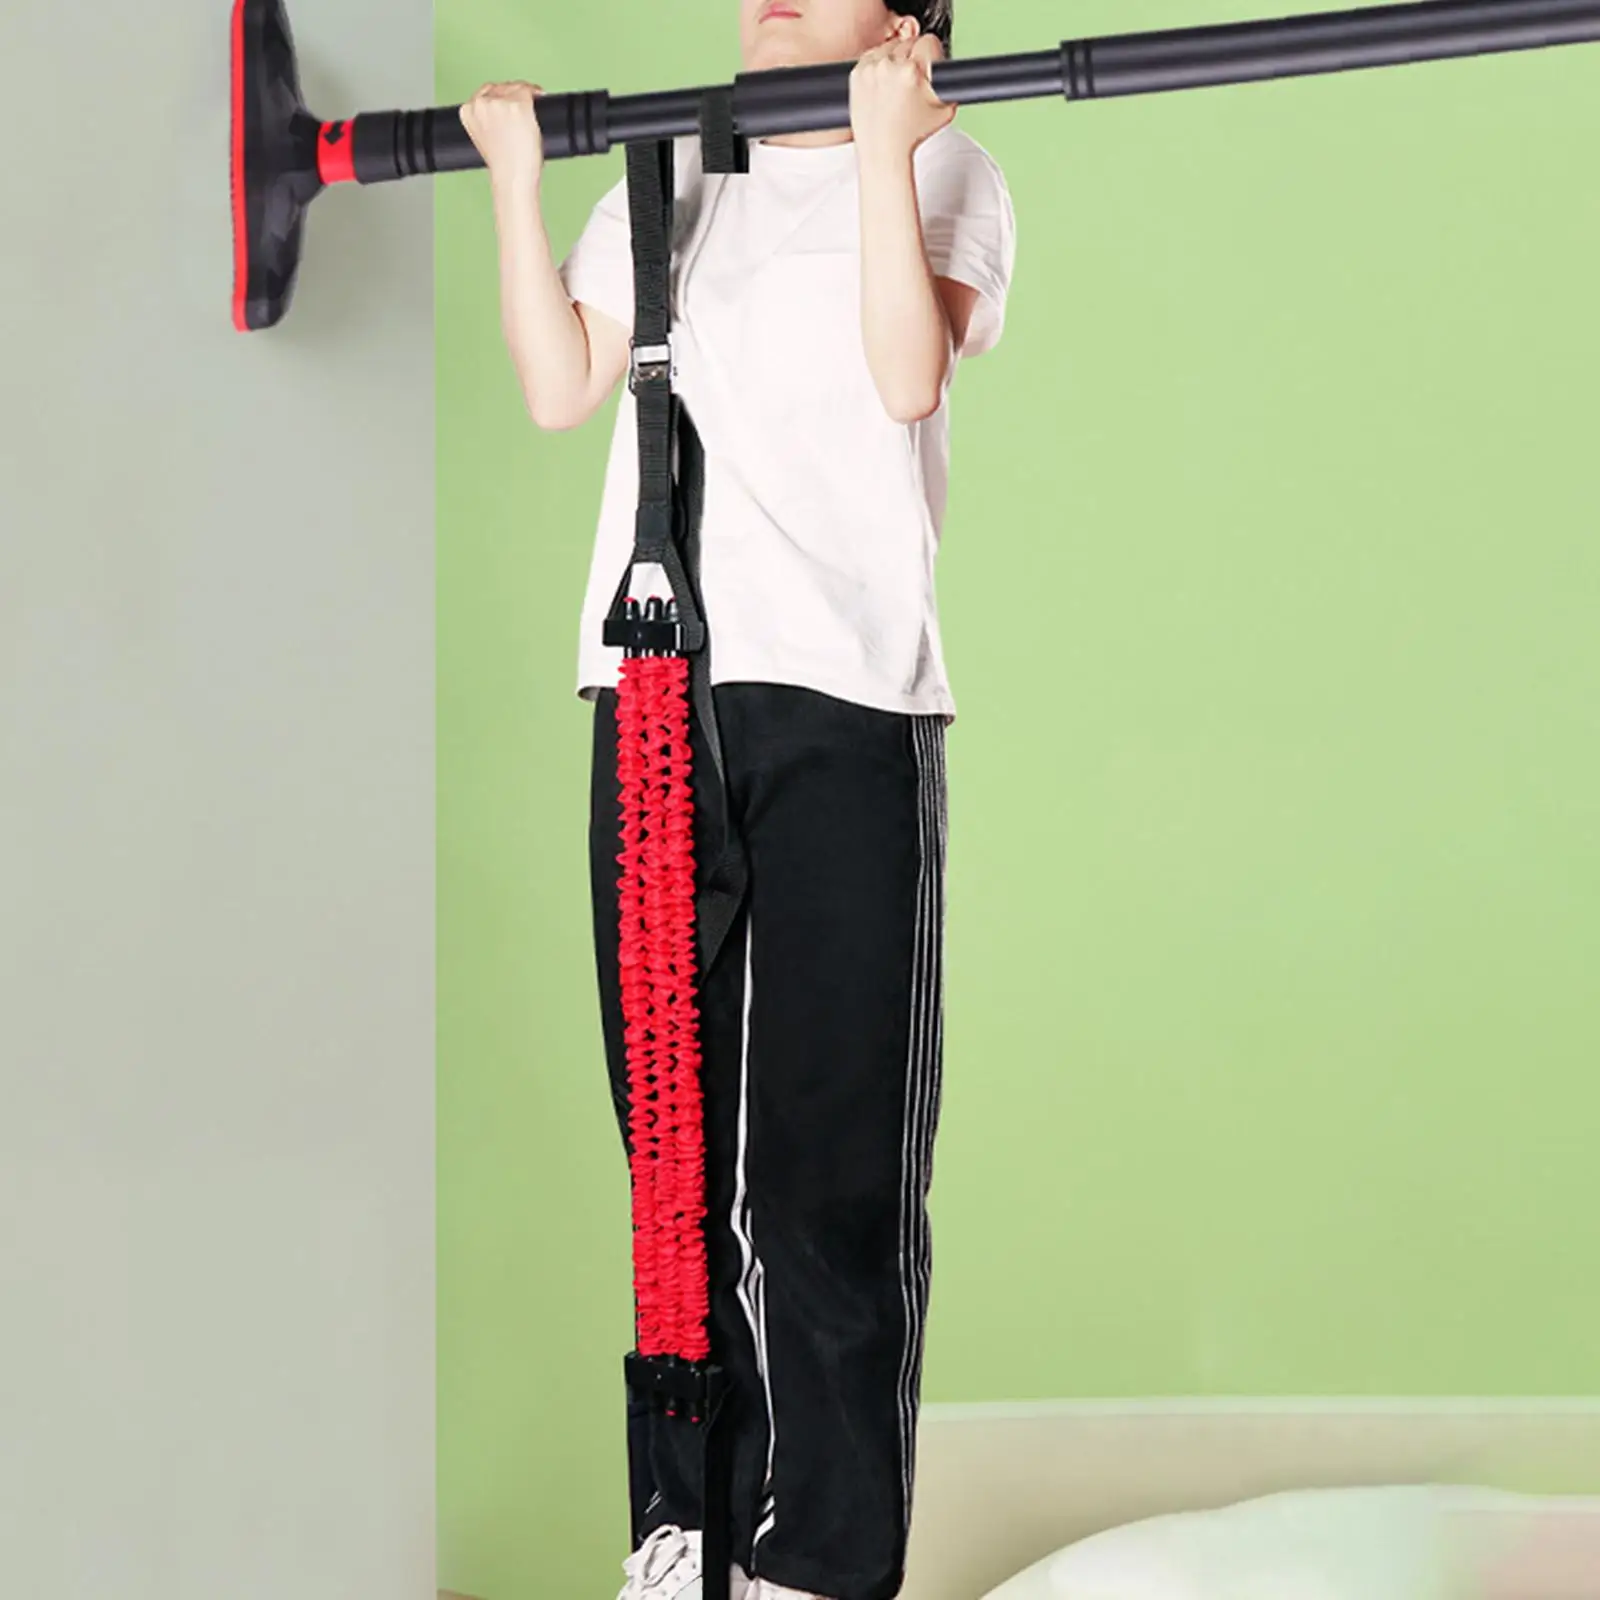 Chin up Assist Bands, Assistance and Resistance Bands for Chin up, Fitness, Body